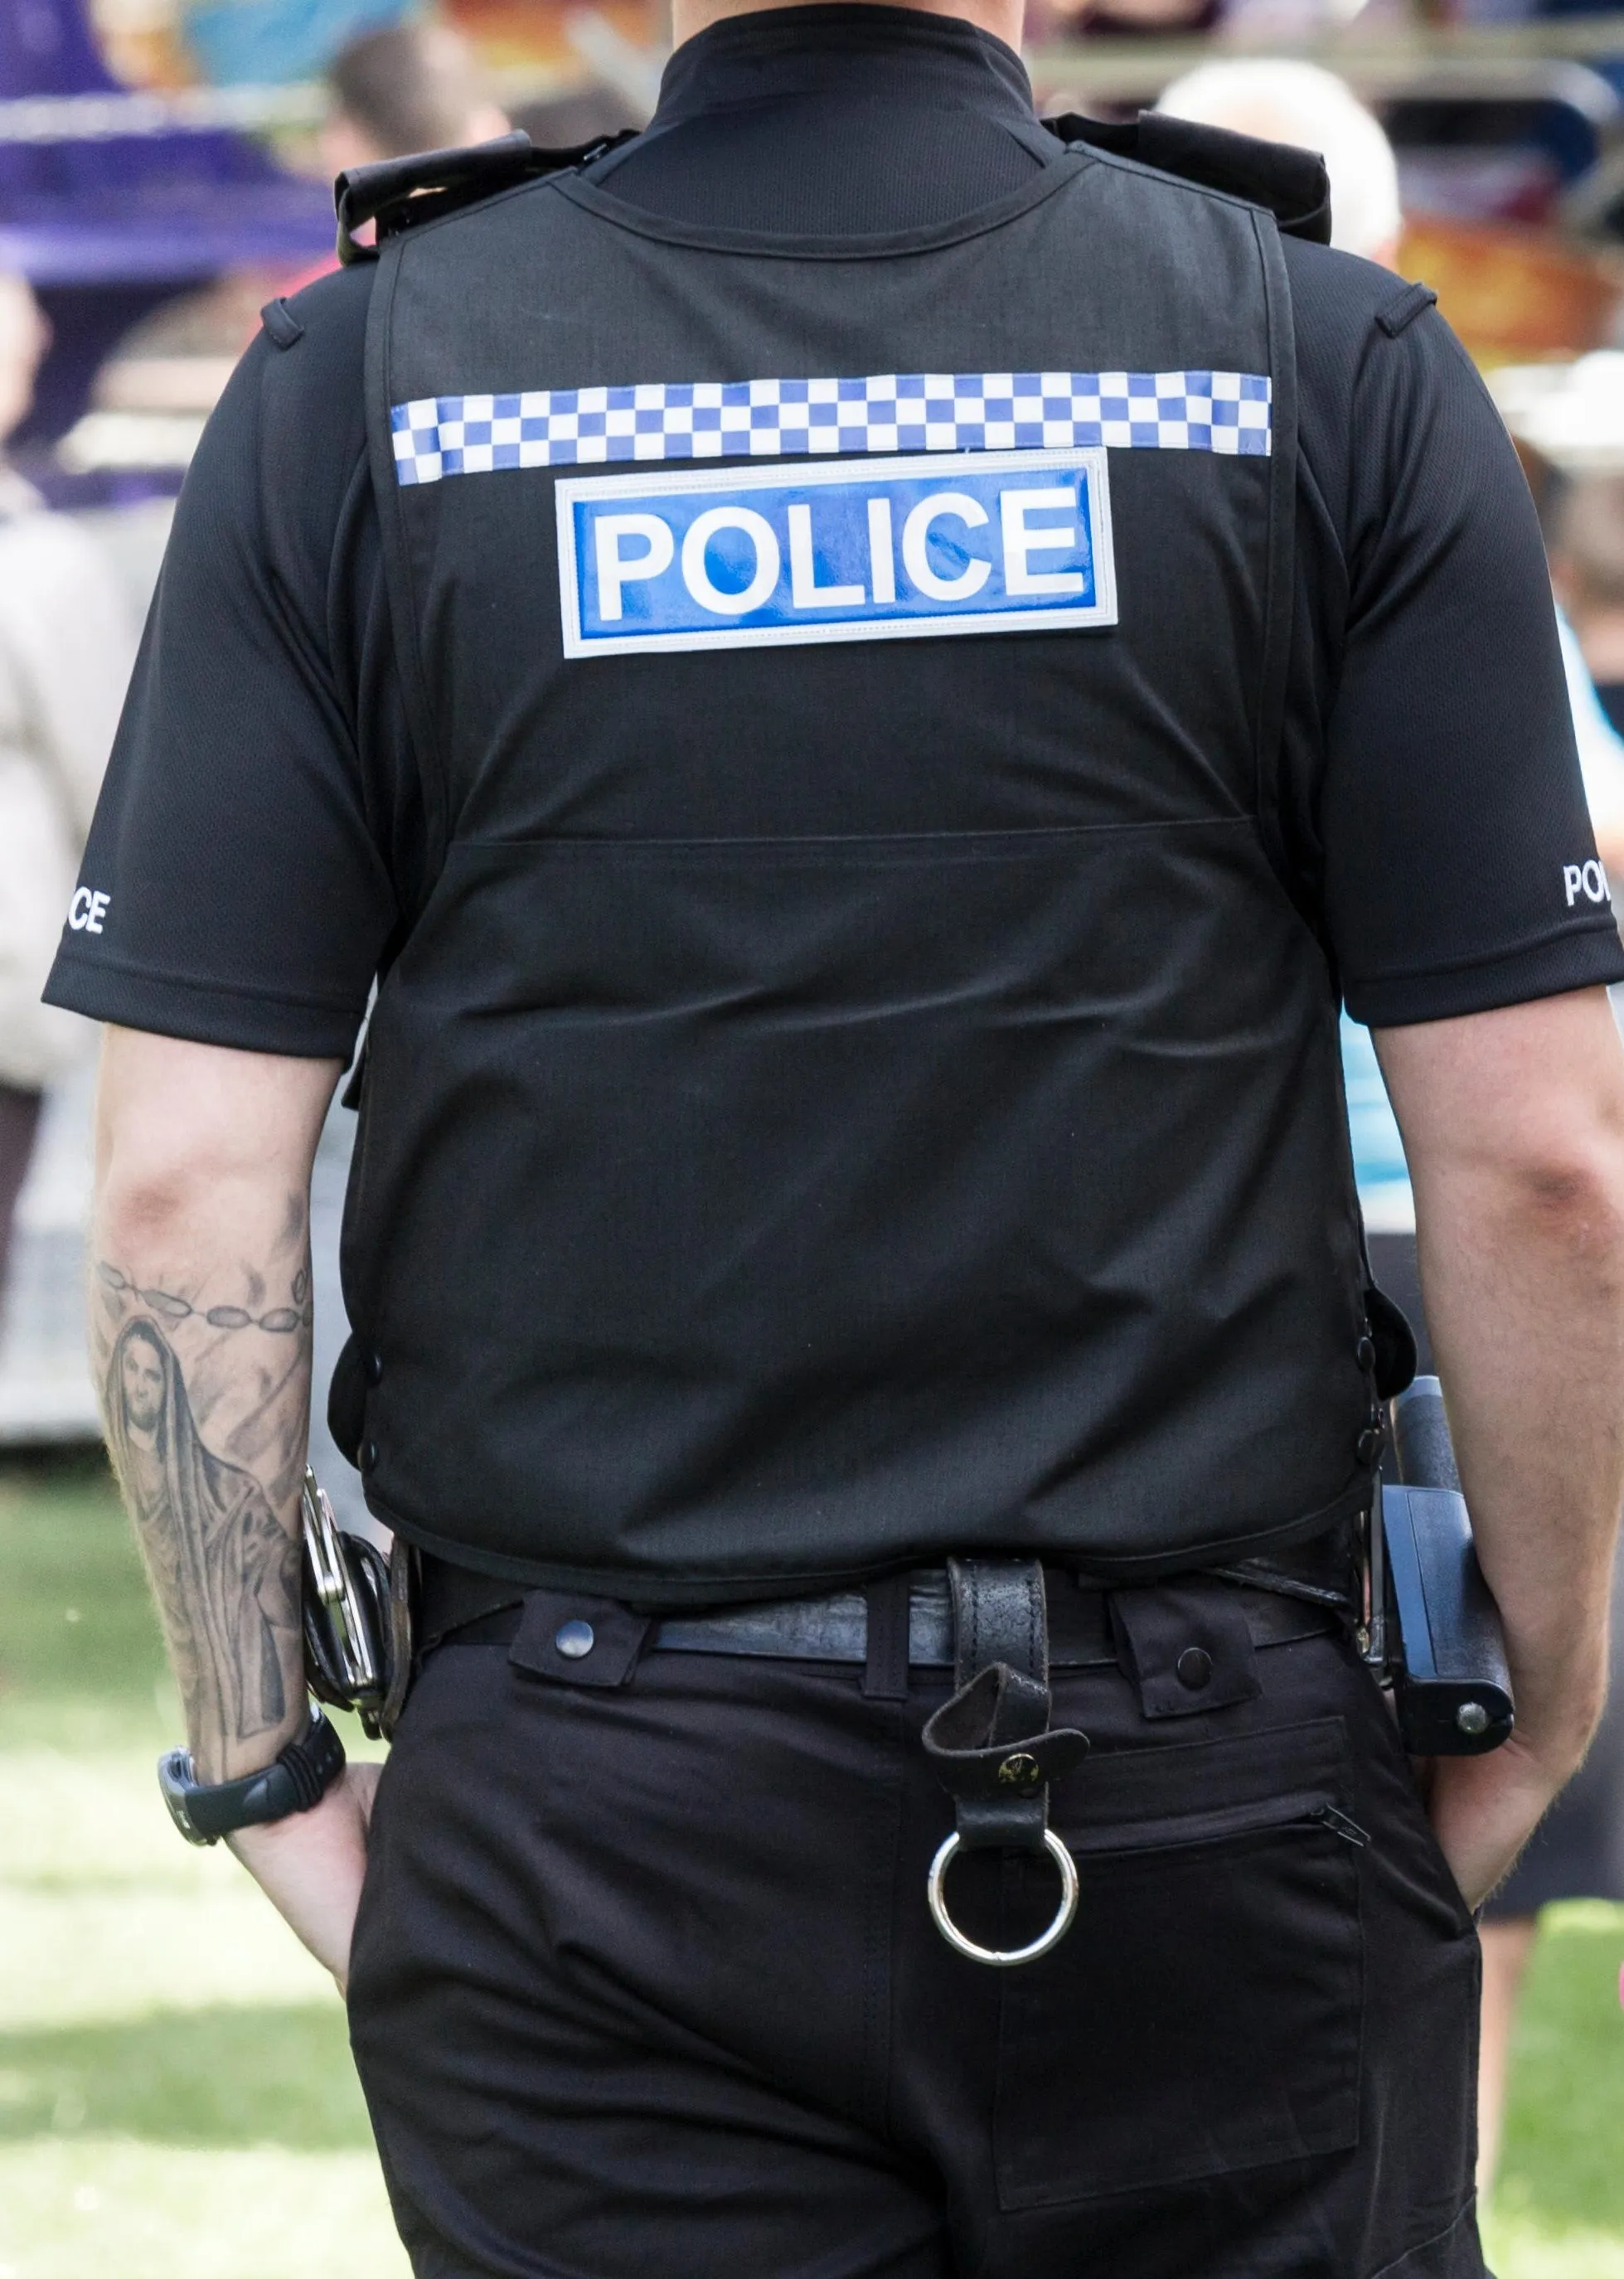 A tattooed policeman in UK, 2016.